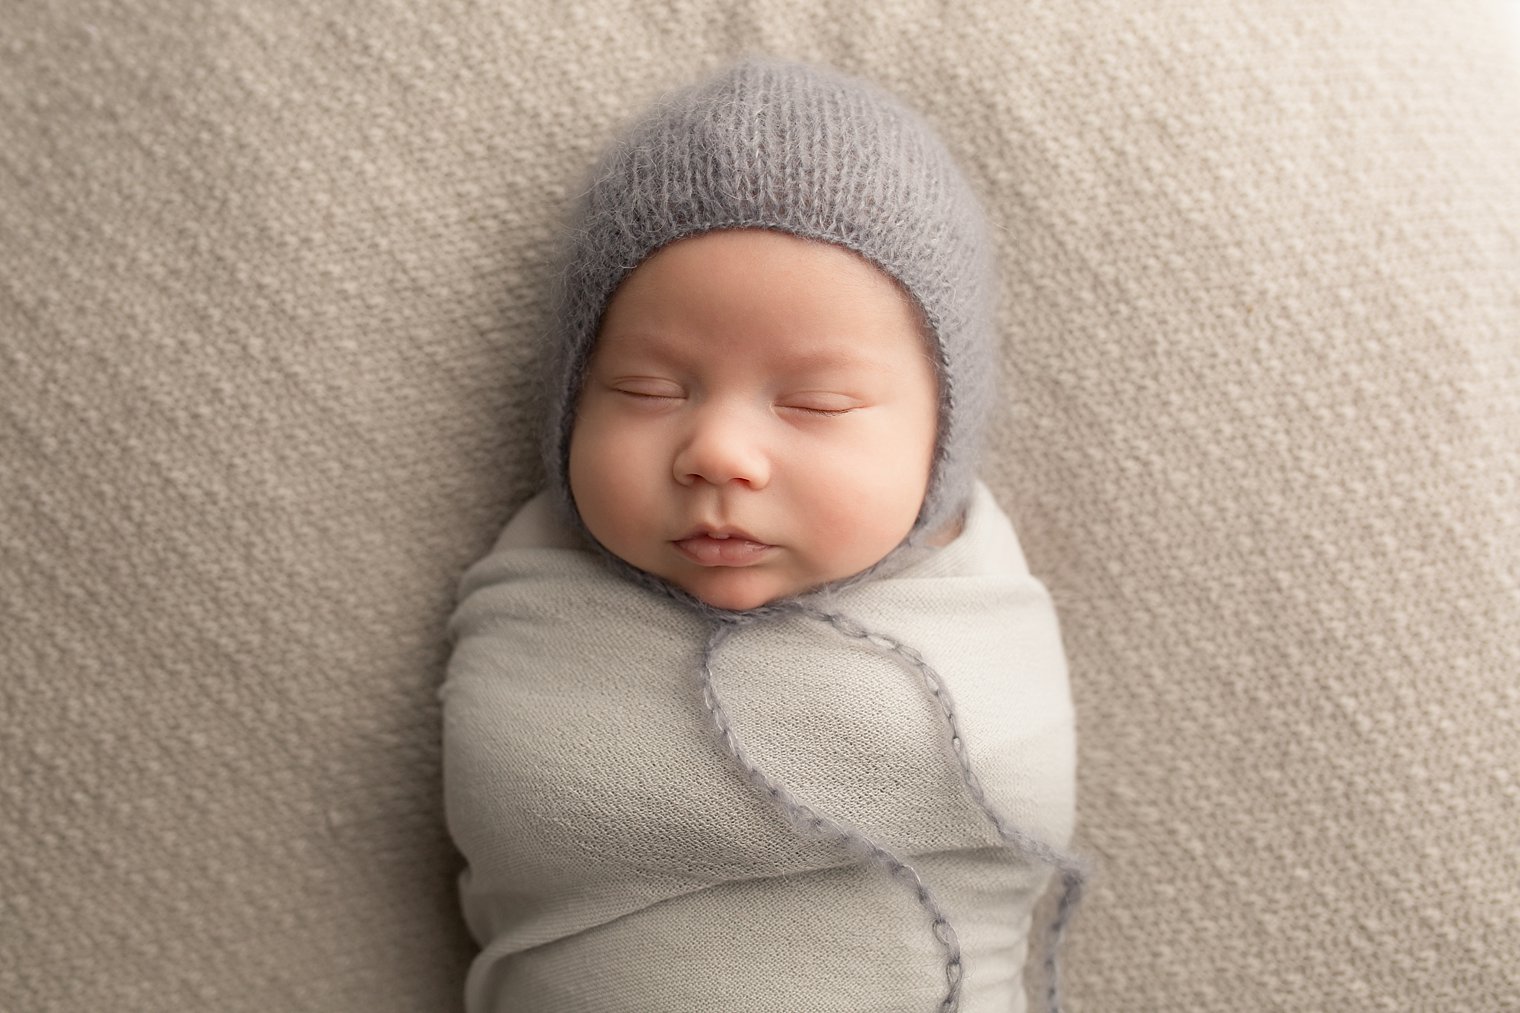 Central NJ Newborn Photographers baby in gray hat photo